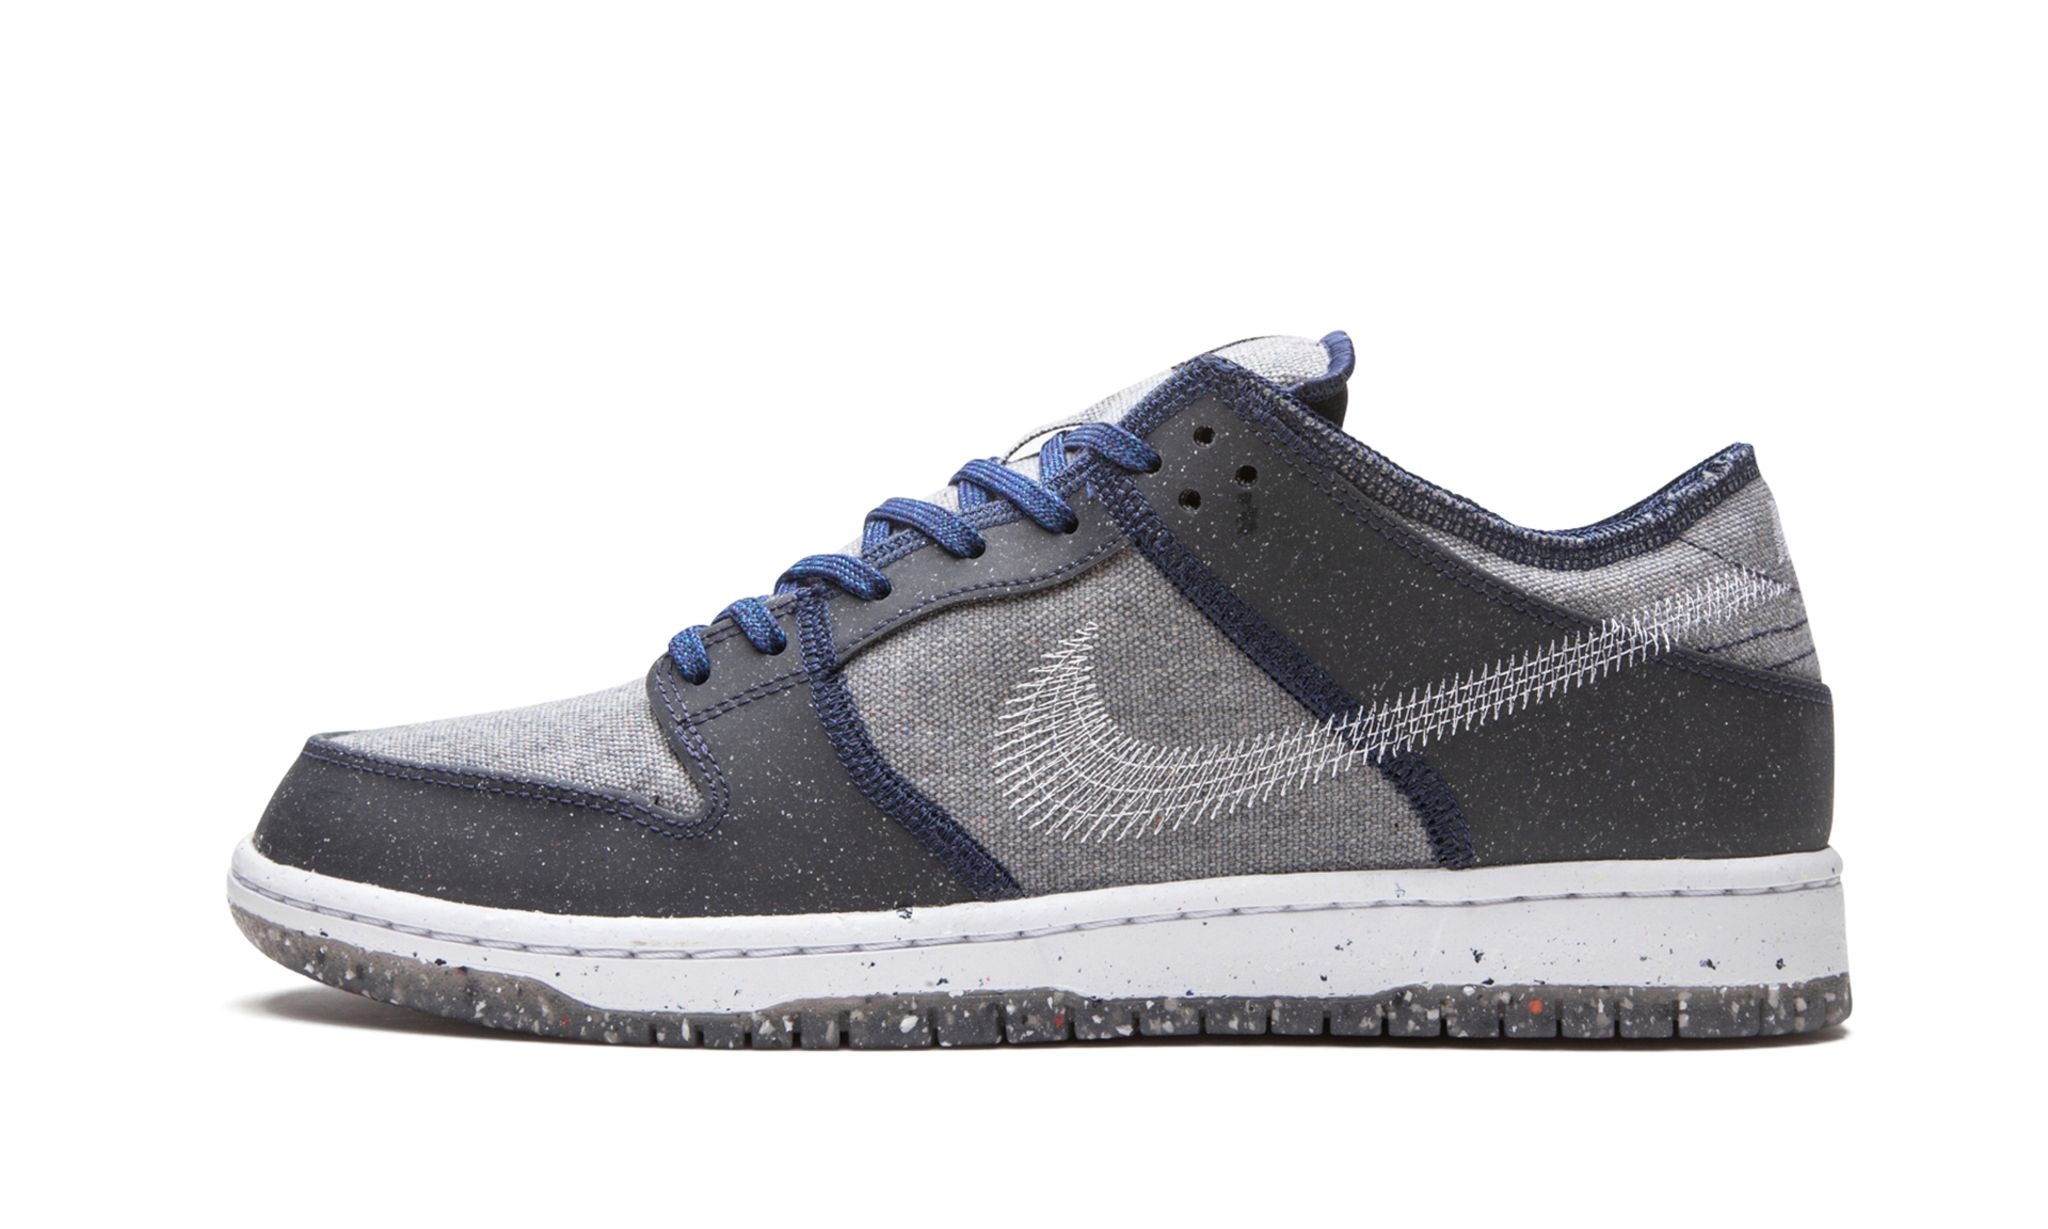 SB Dunk Low "Crater" - 1